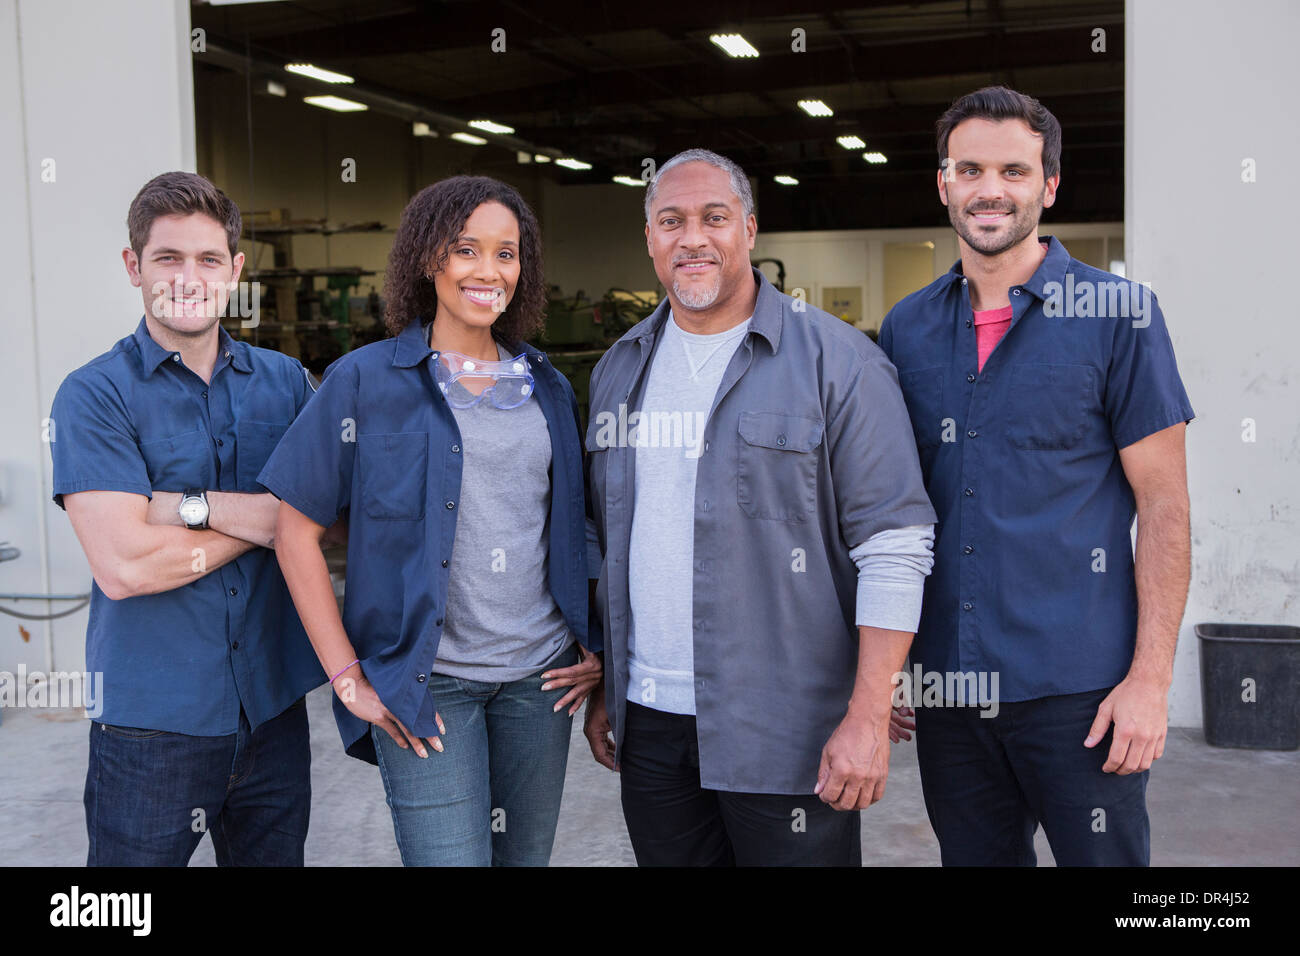 Workers smiling outside warehouse Stock Photo